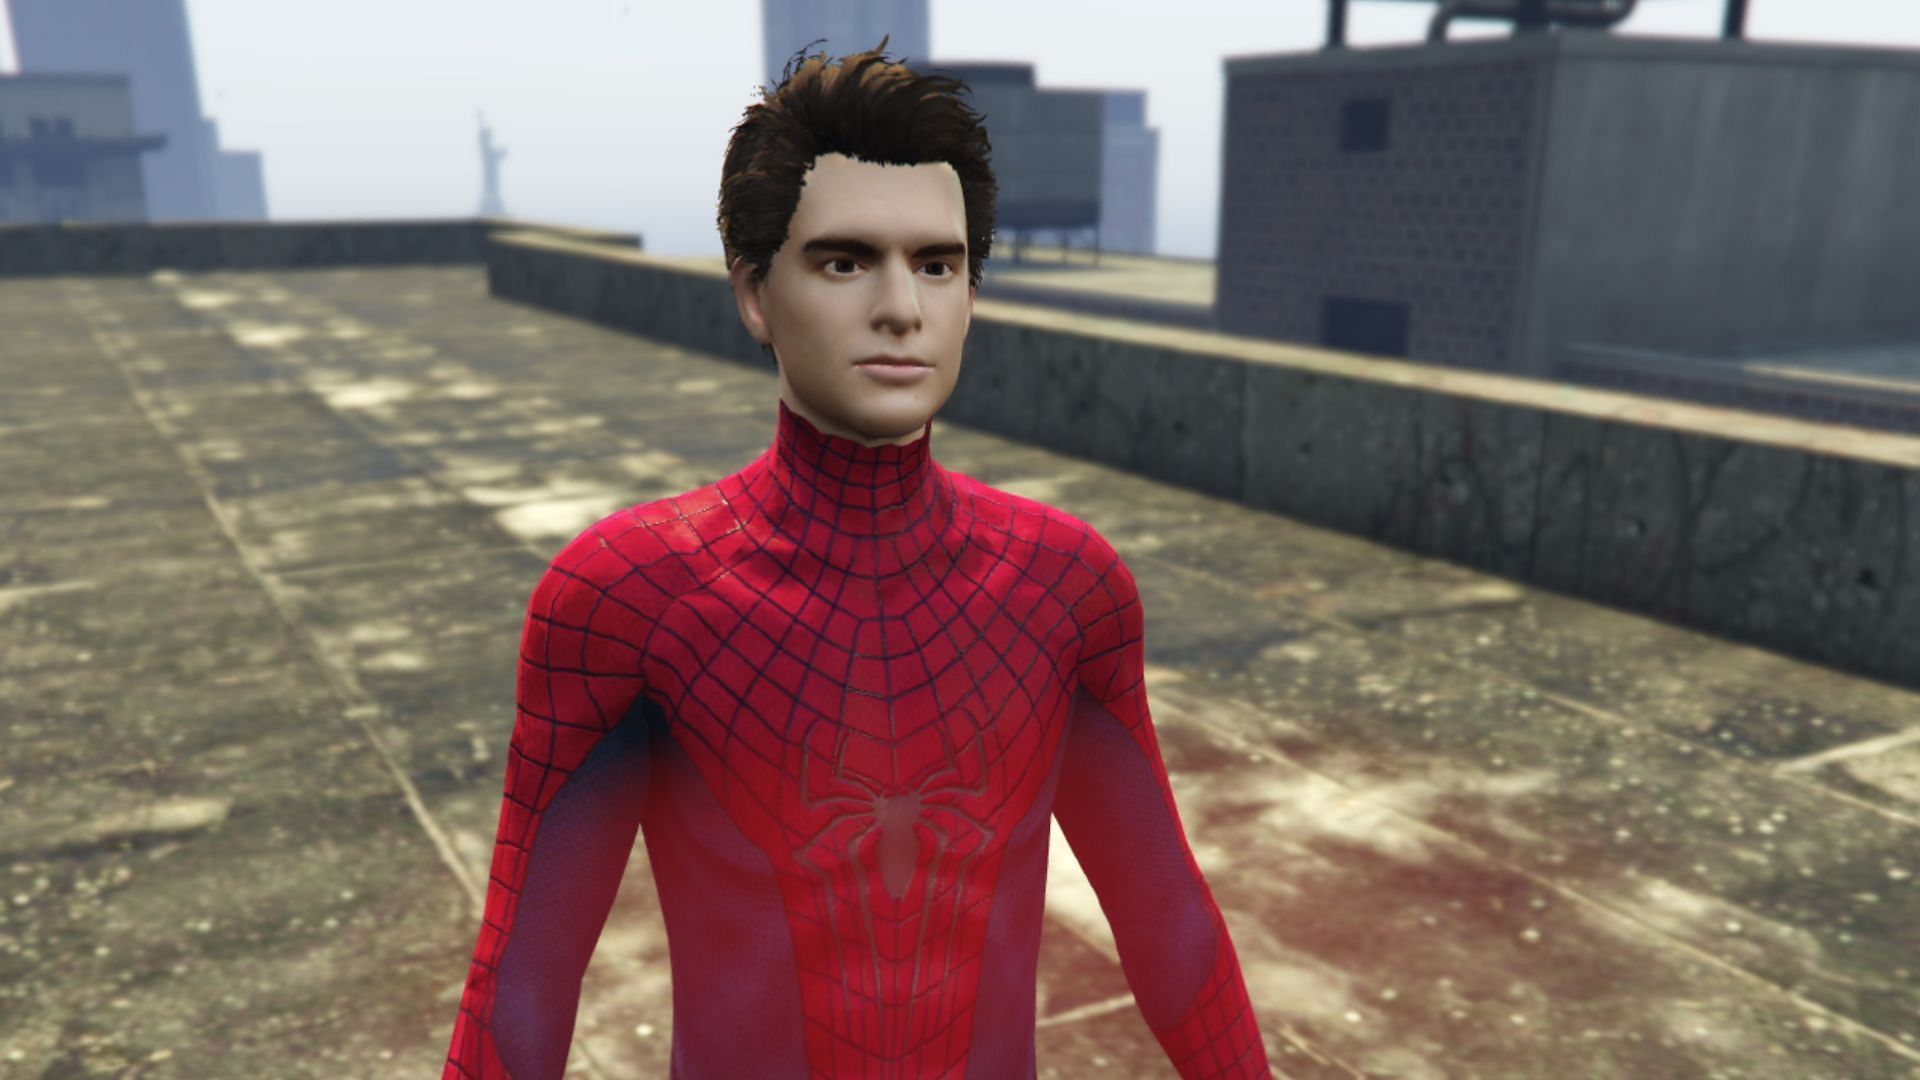 A screenshot of The Amazing Spider-Man suit available with the mod (Image via gtav_KWABZ)